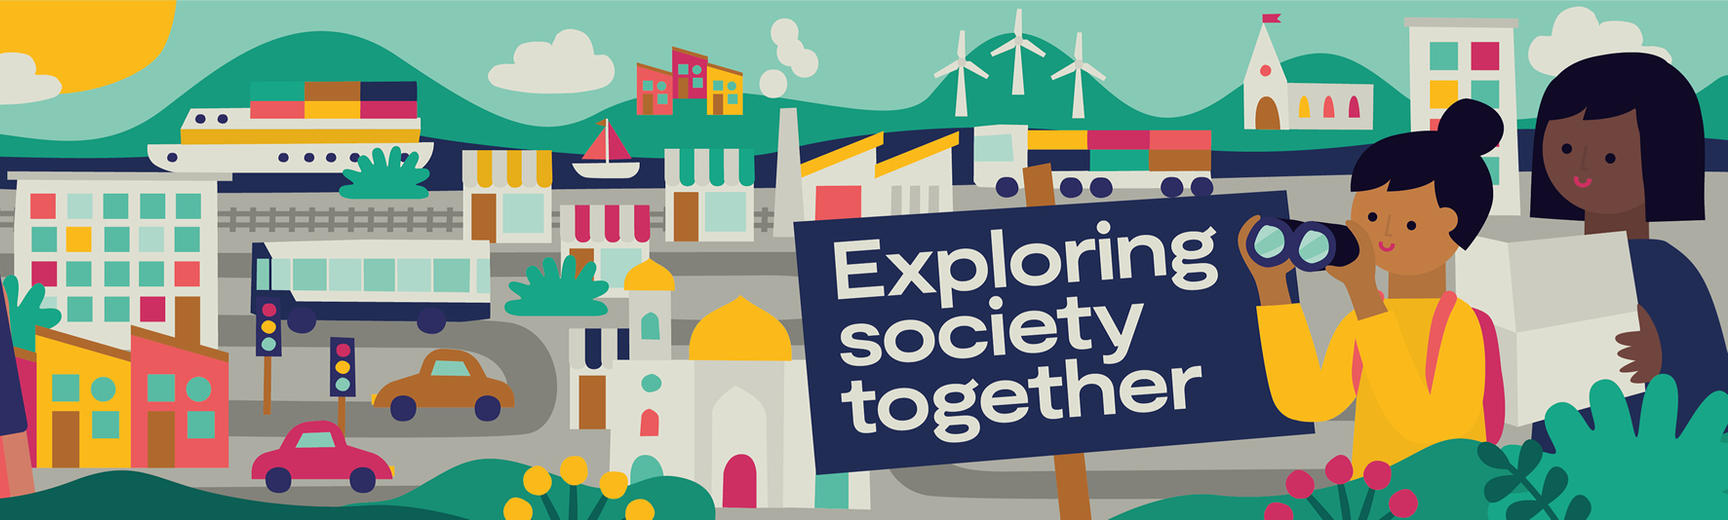 Children's cartoon representation of a society, showing transport systems, renewable energies, buildings, and young people with binoculars. Sign reads 'Exploring society together'